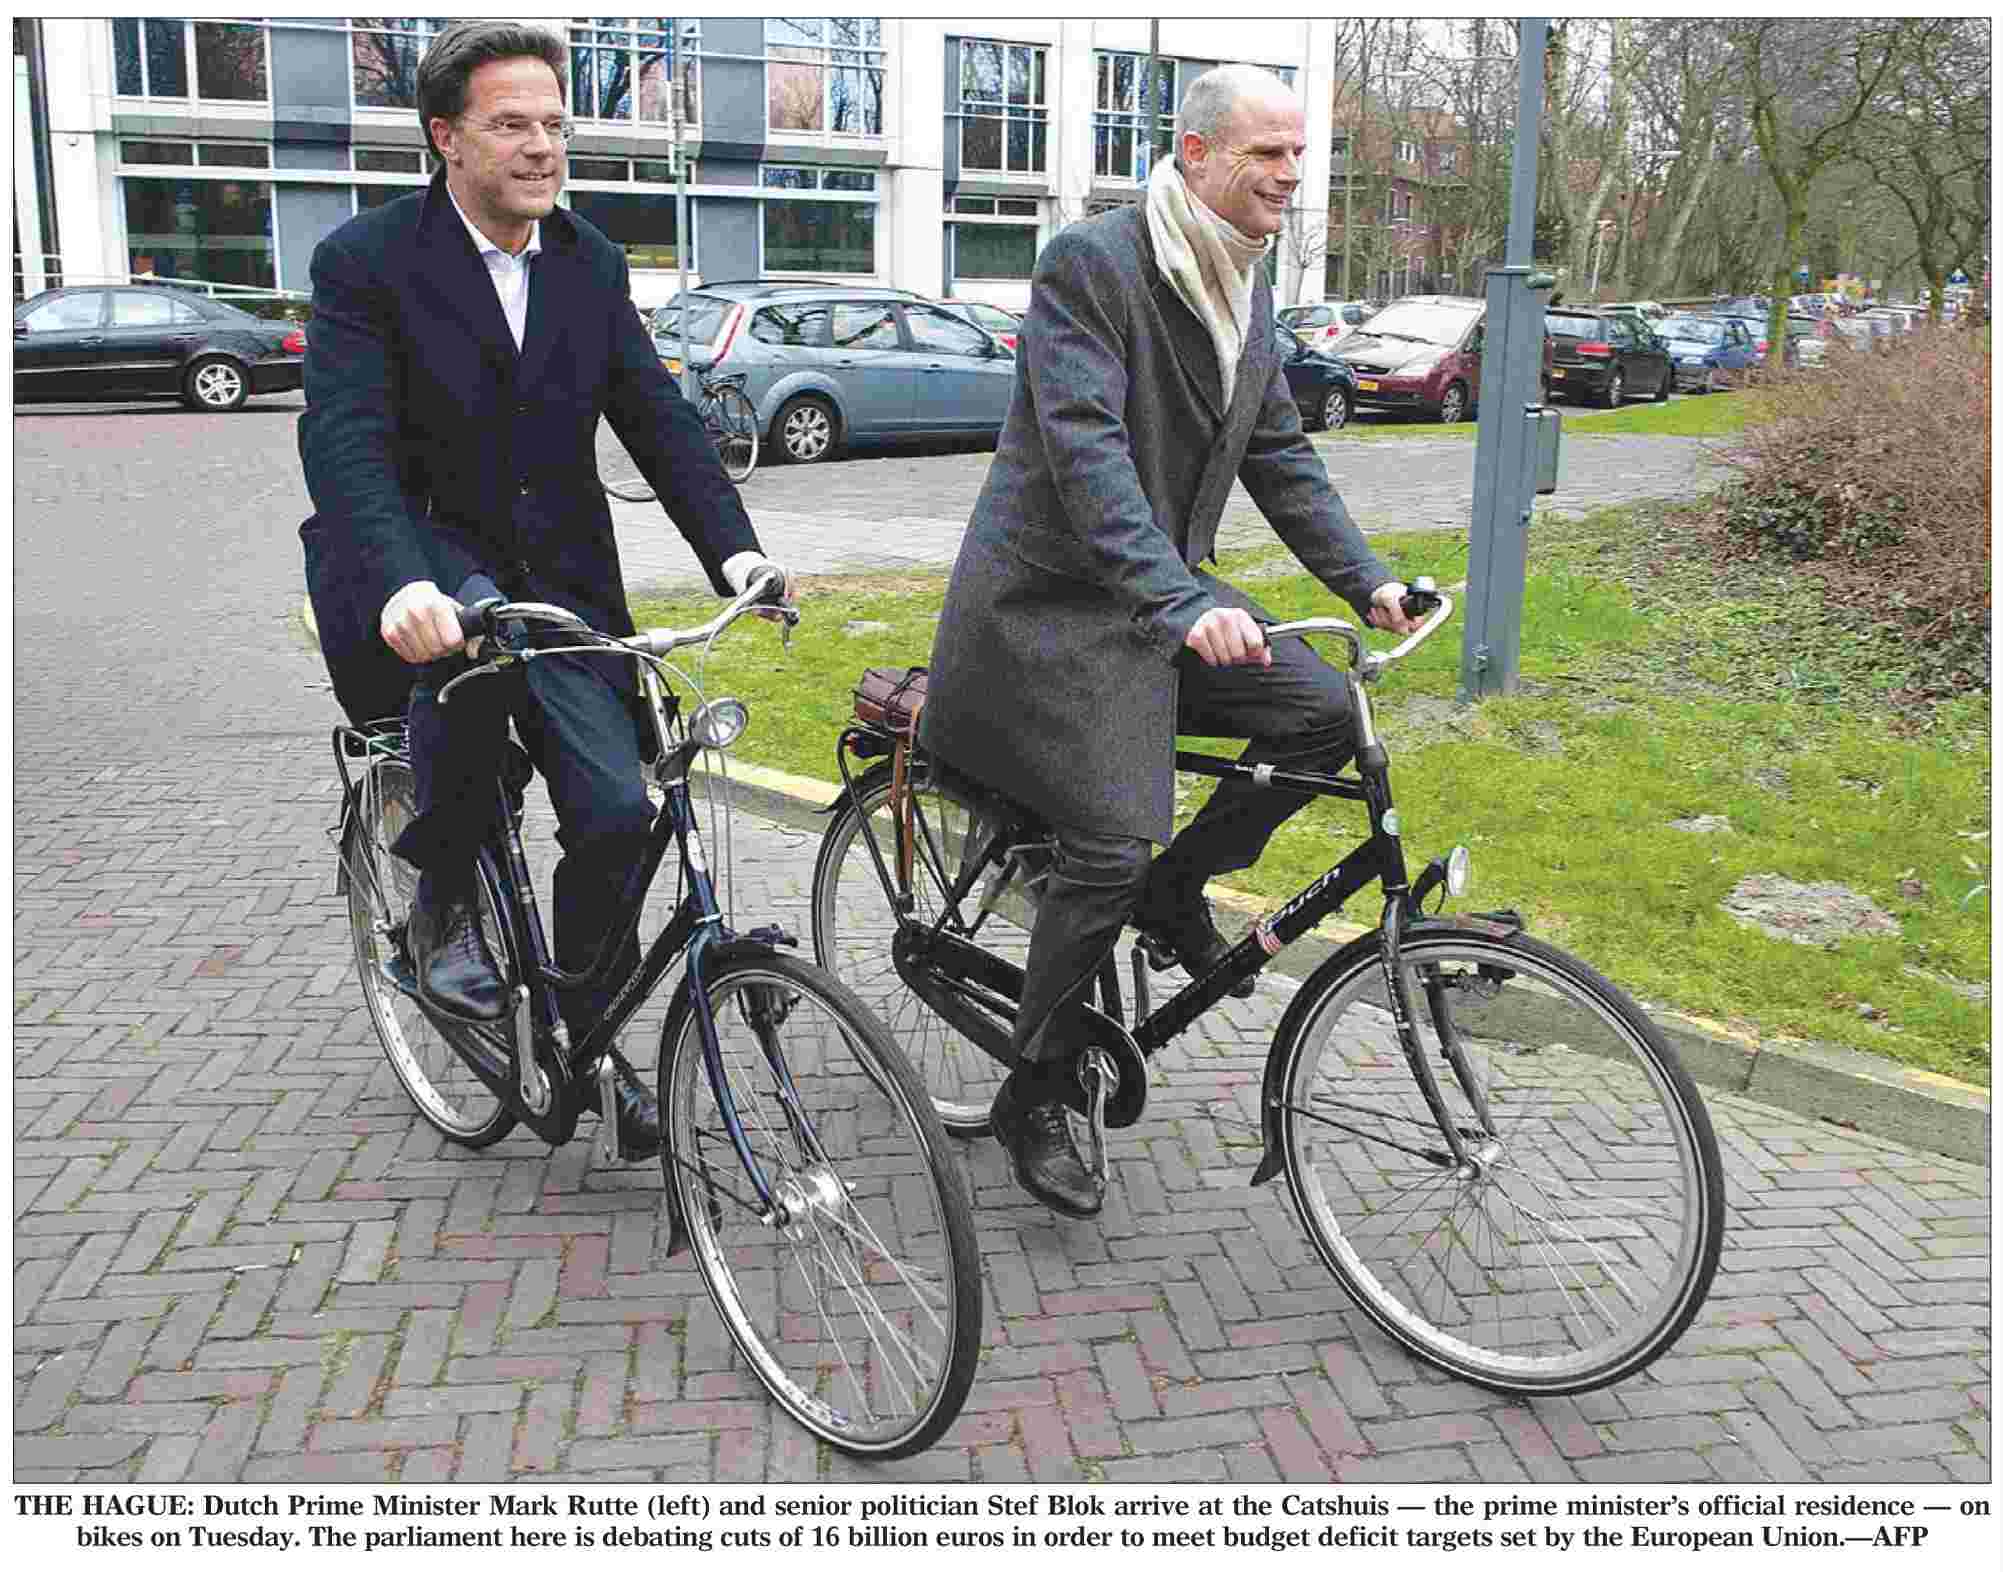 http://www.learningall.com/wp-content/uploads/2012/03/dutch-prime-minister-mark-rutte-and-stef-blok.jpg